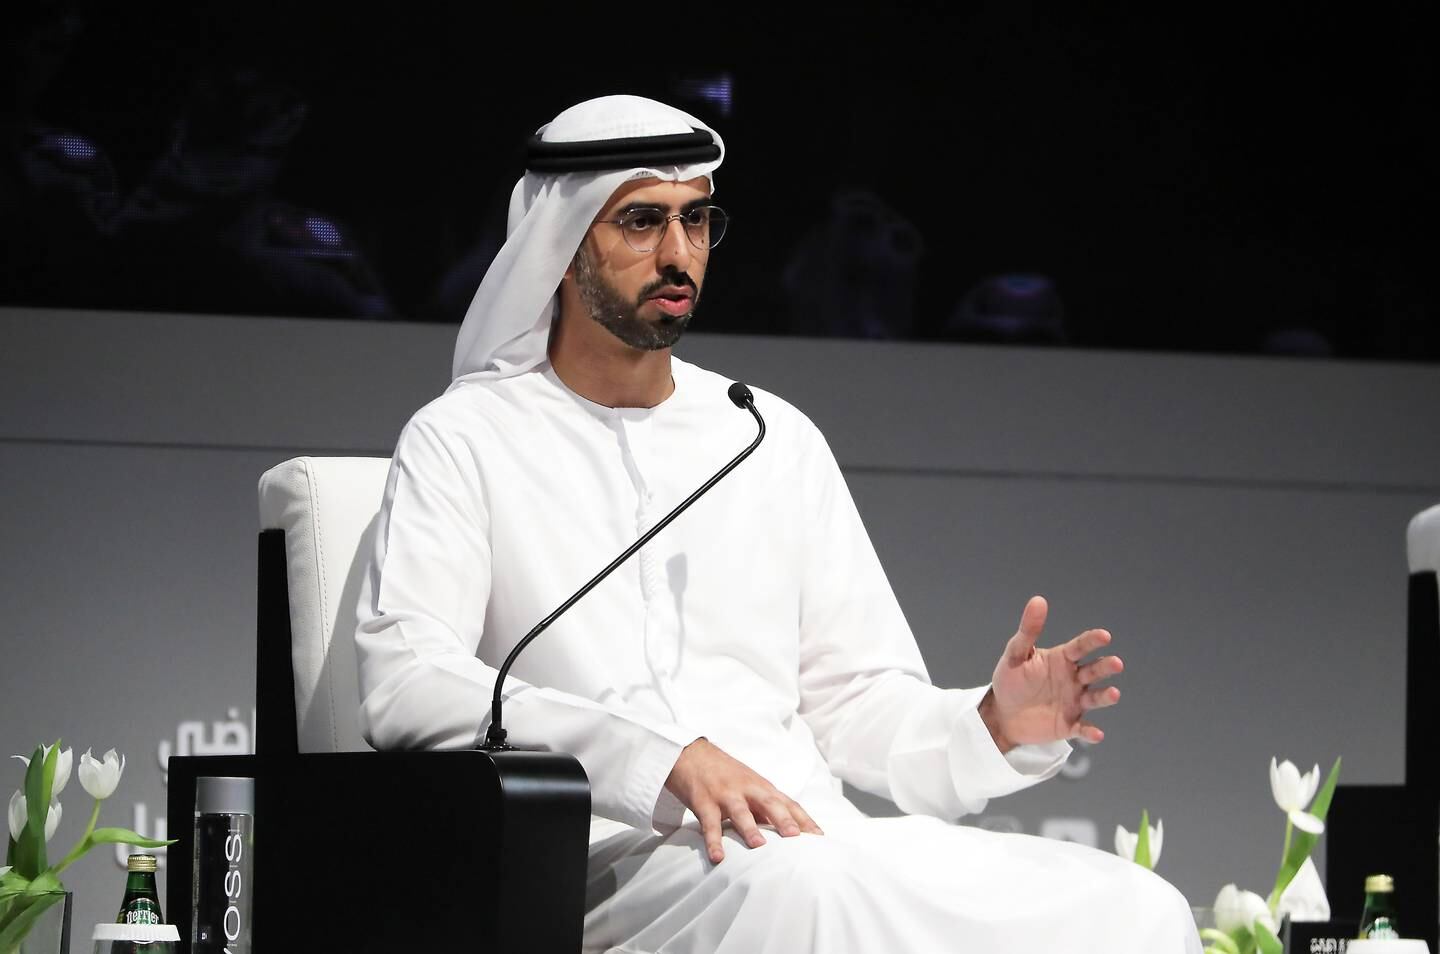 Omar Al Olama, Minister of State for Artificial Intelligence, Digital Economy and Remote Work Applications, says Meta's Spark AR Challenge contributes to building a digital economy based on knowledge and innovation. Pawan Singh / The National